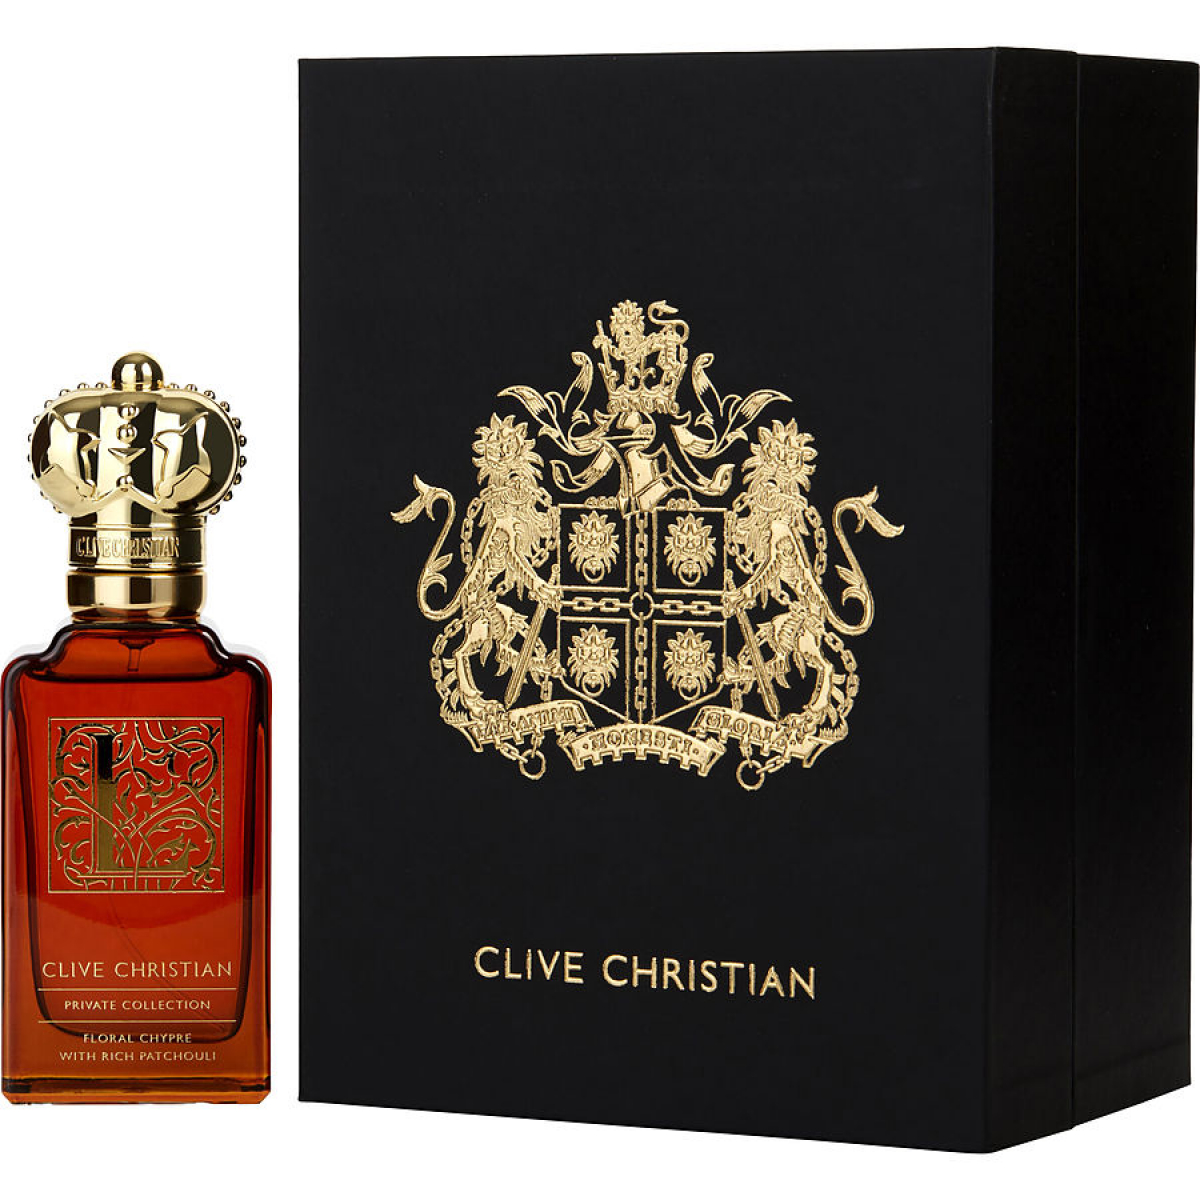 Clive christian парфюм. Клайв Кристиан духи. Clive Christian l for women Floral Chypre with Rich Patchouli. Clive Christian l: Floral Chypre woman. Chypre Floral духи.